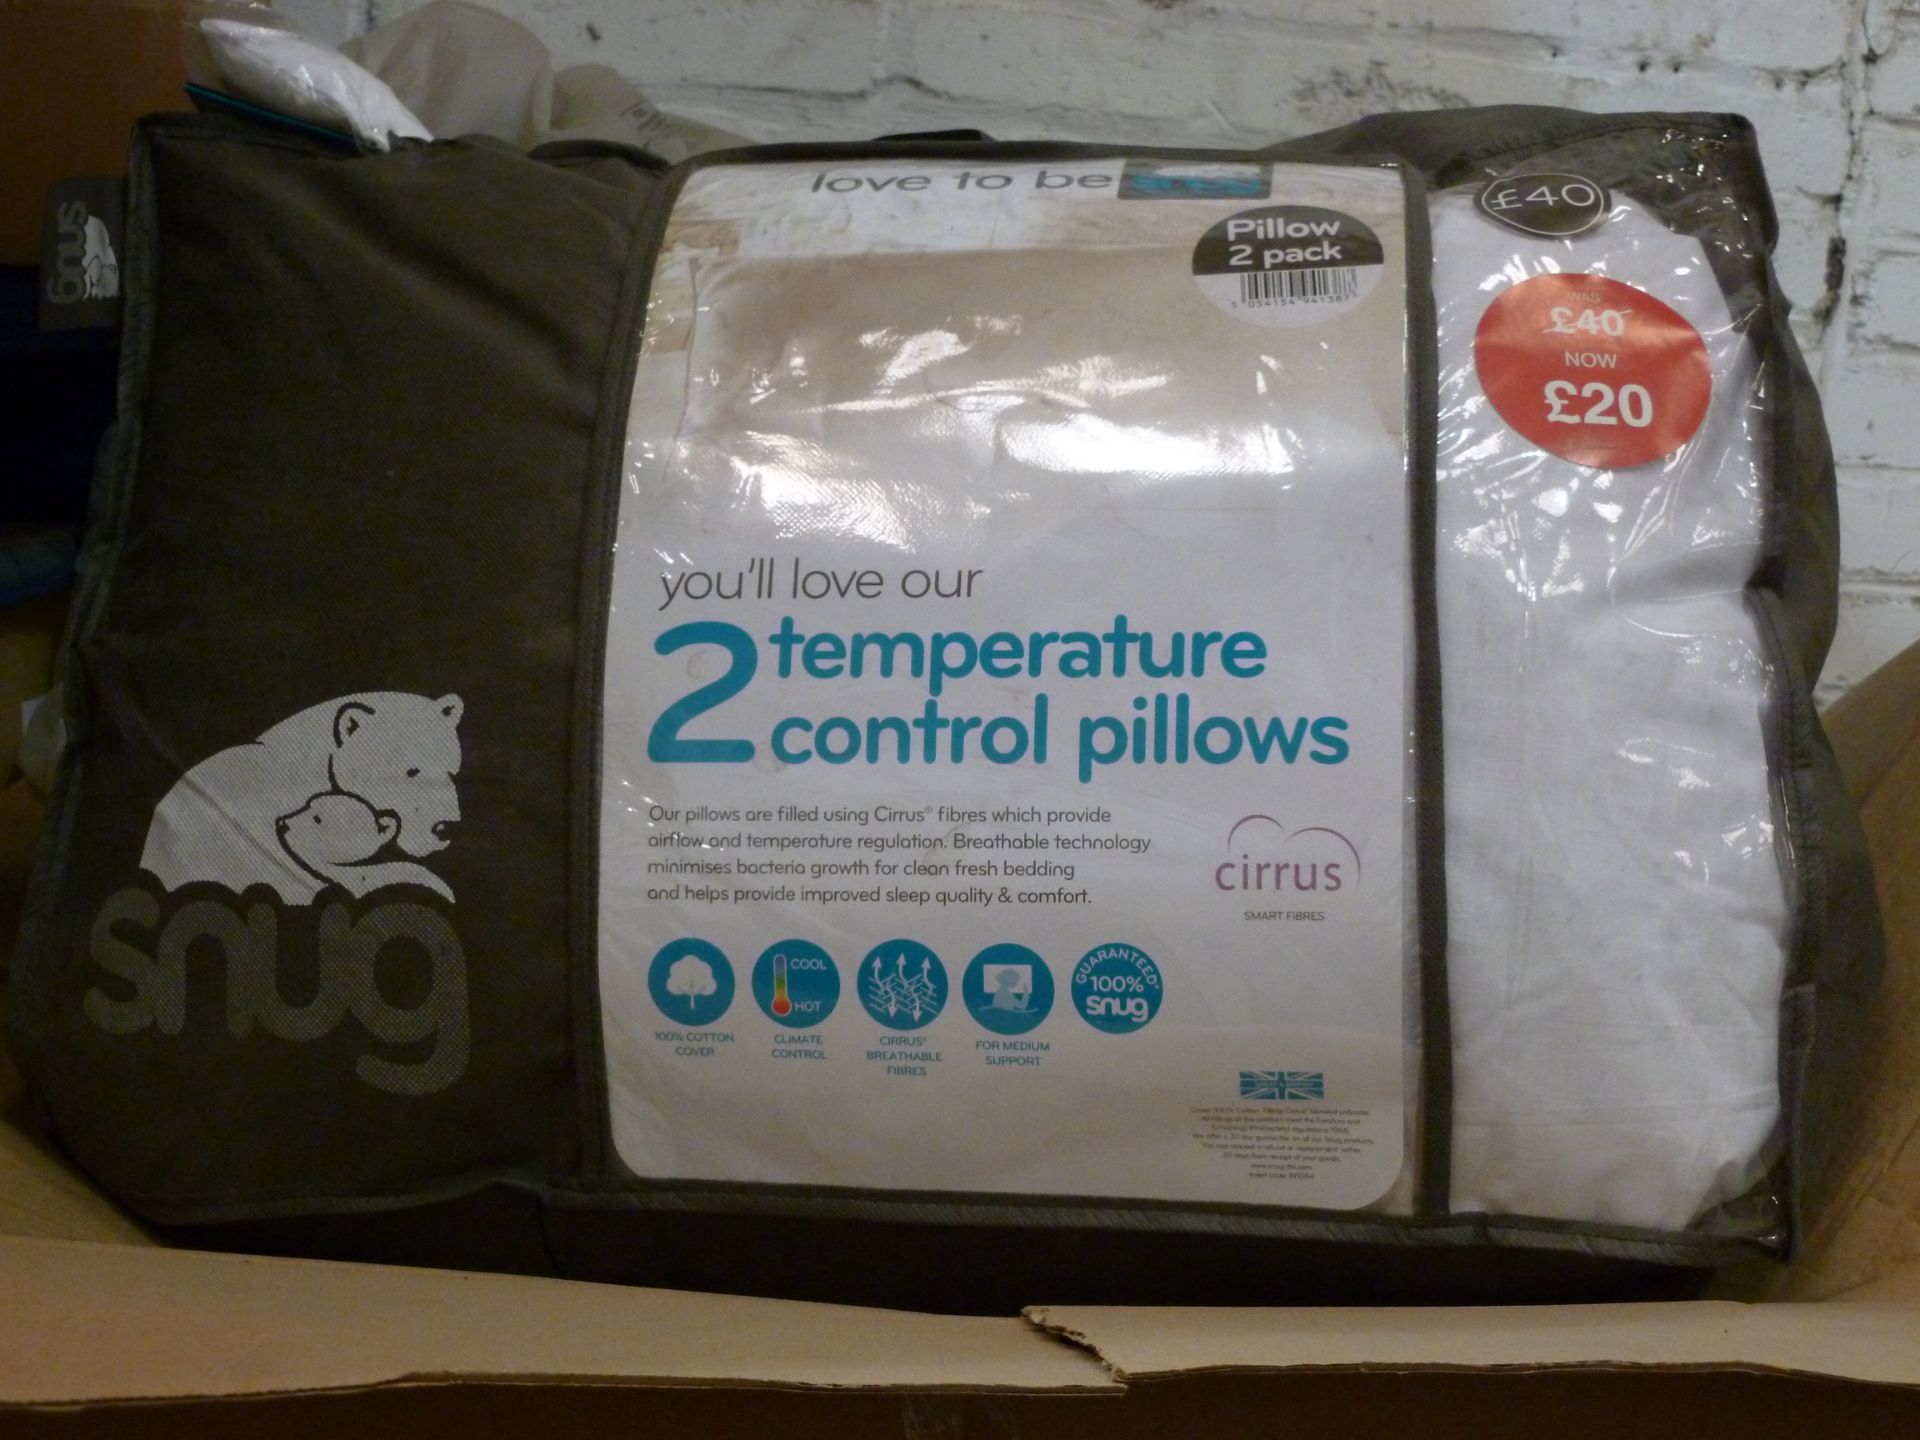 Pack of 5x Snug pair of temperature control pillows (10 pillows in total), all new in packaging.